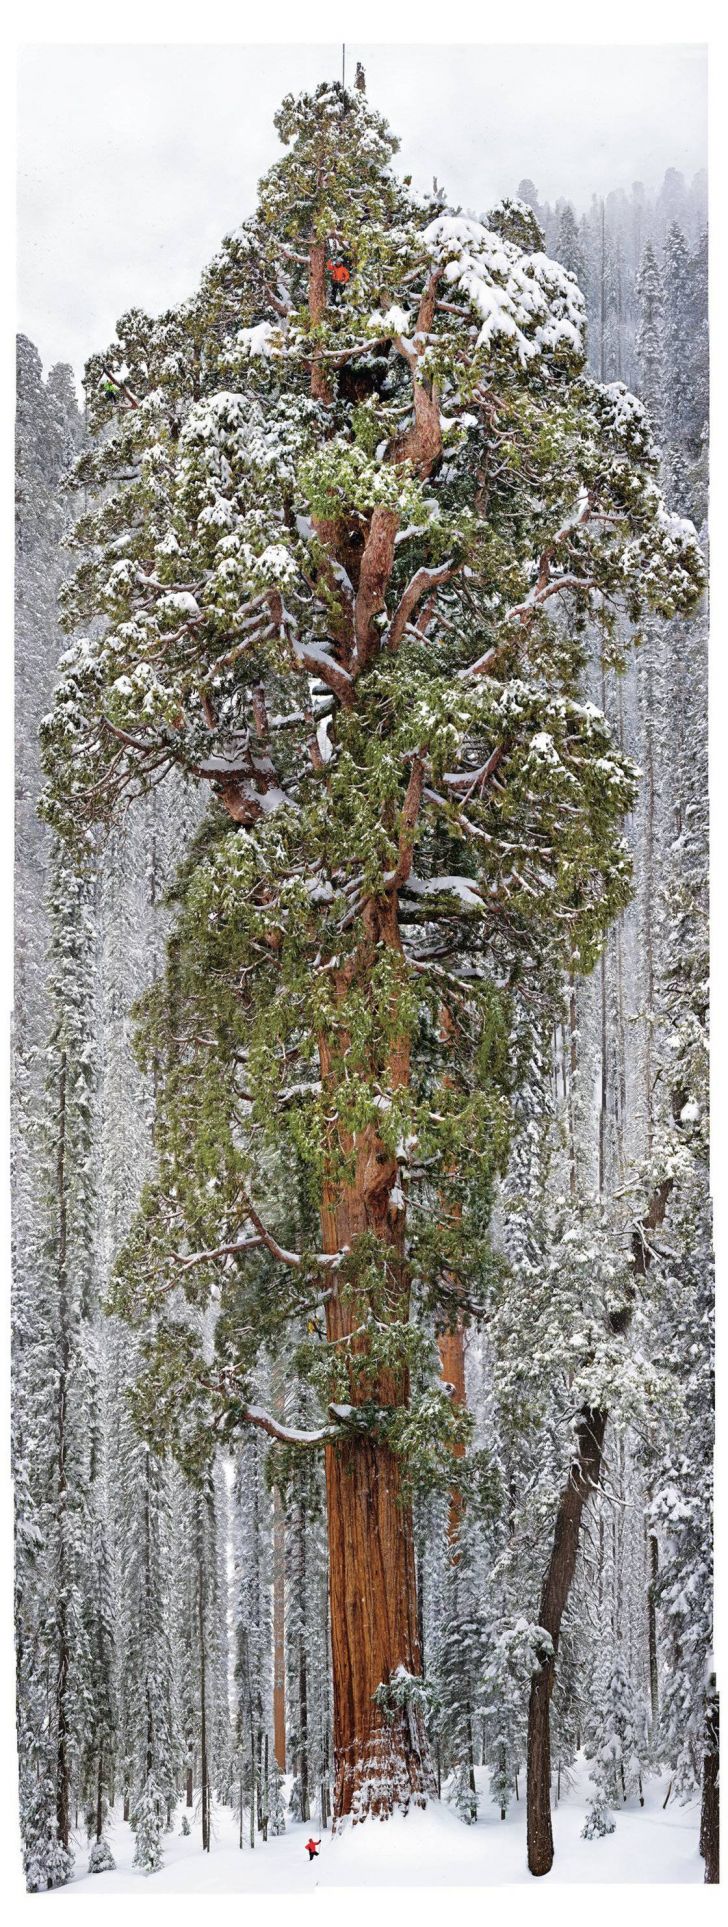 126 images combined to show the massiveness of a 3,200 year old tree in the Sequoia National Park.